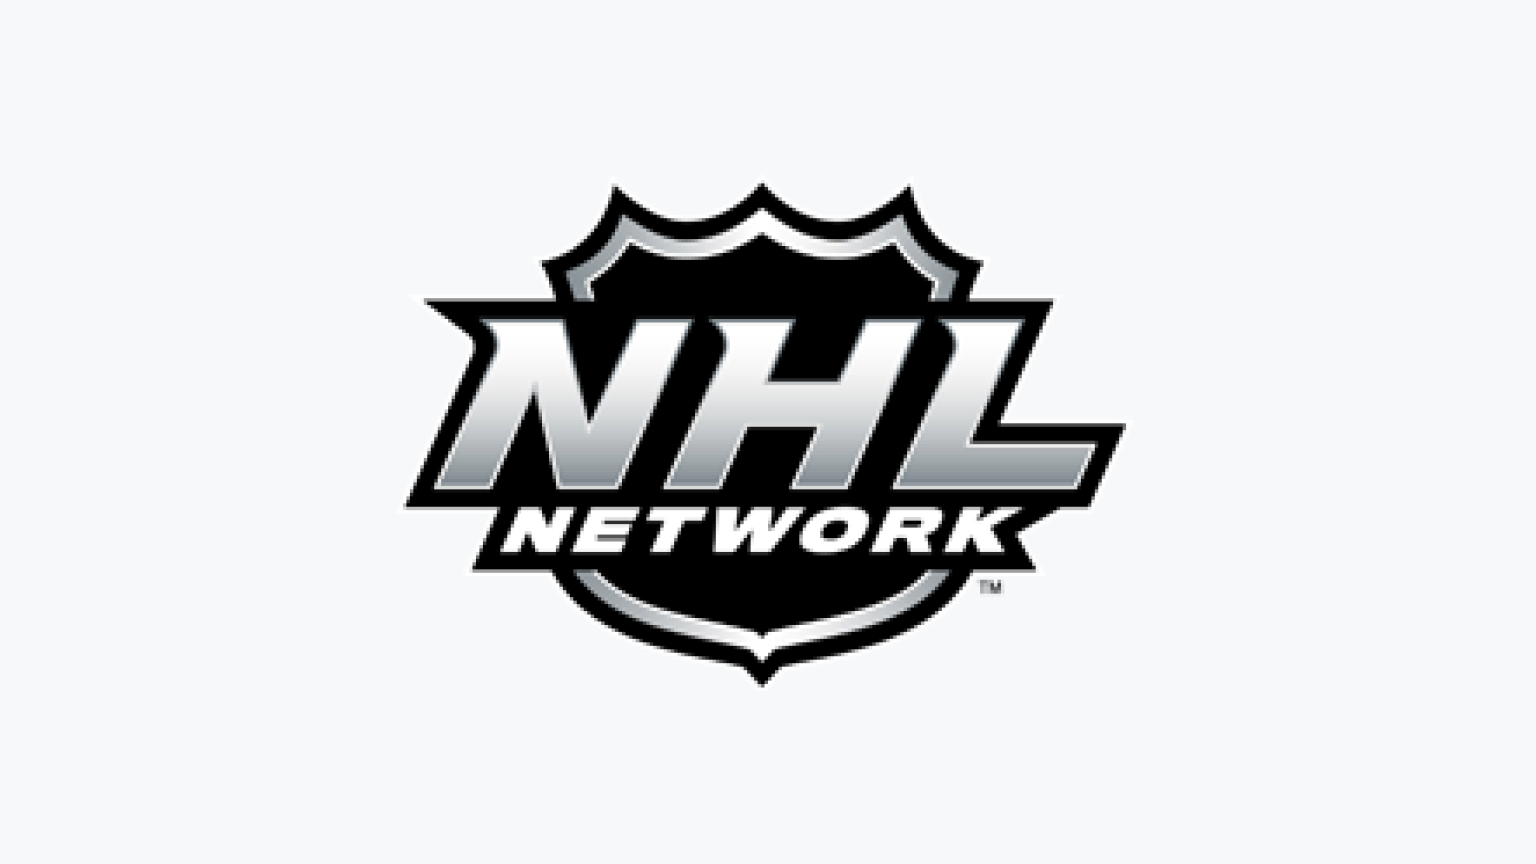 How to Watch NHL Network Live Without Cable in 2023